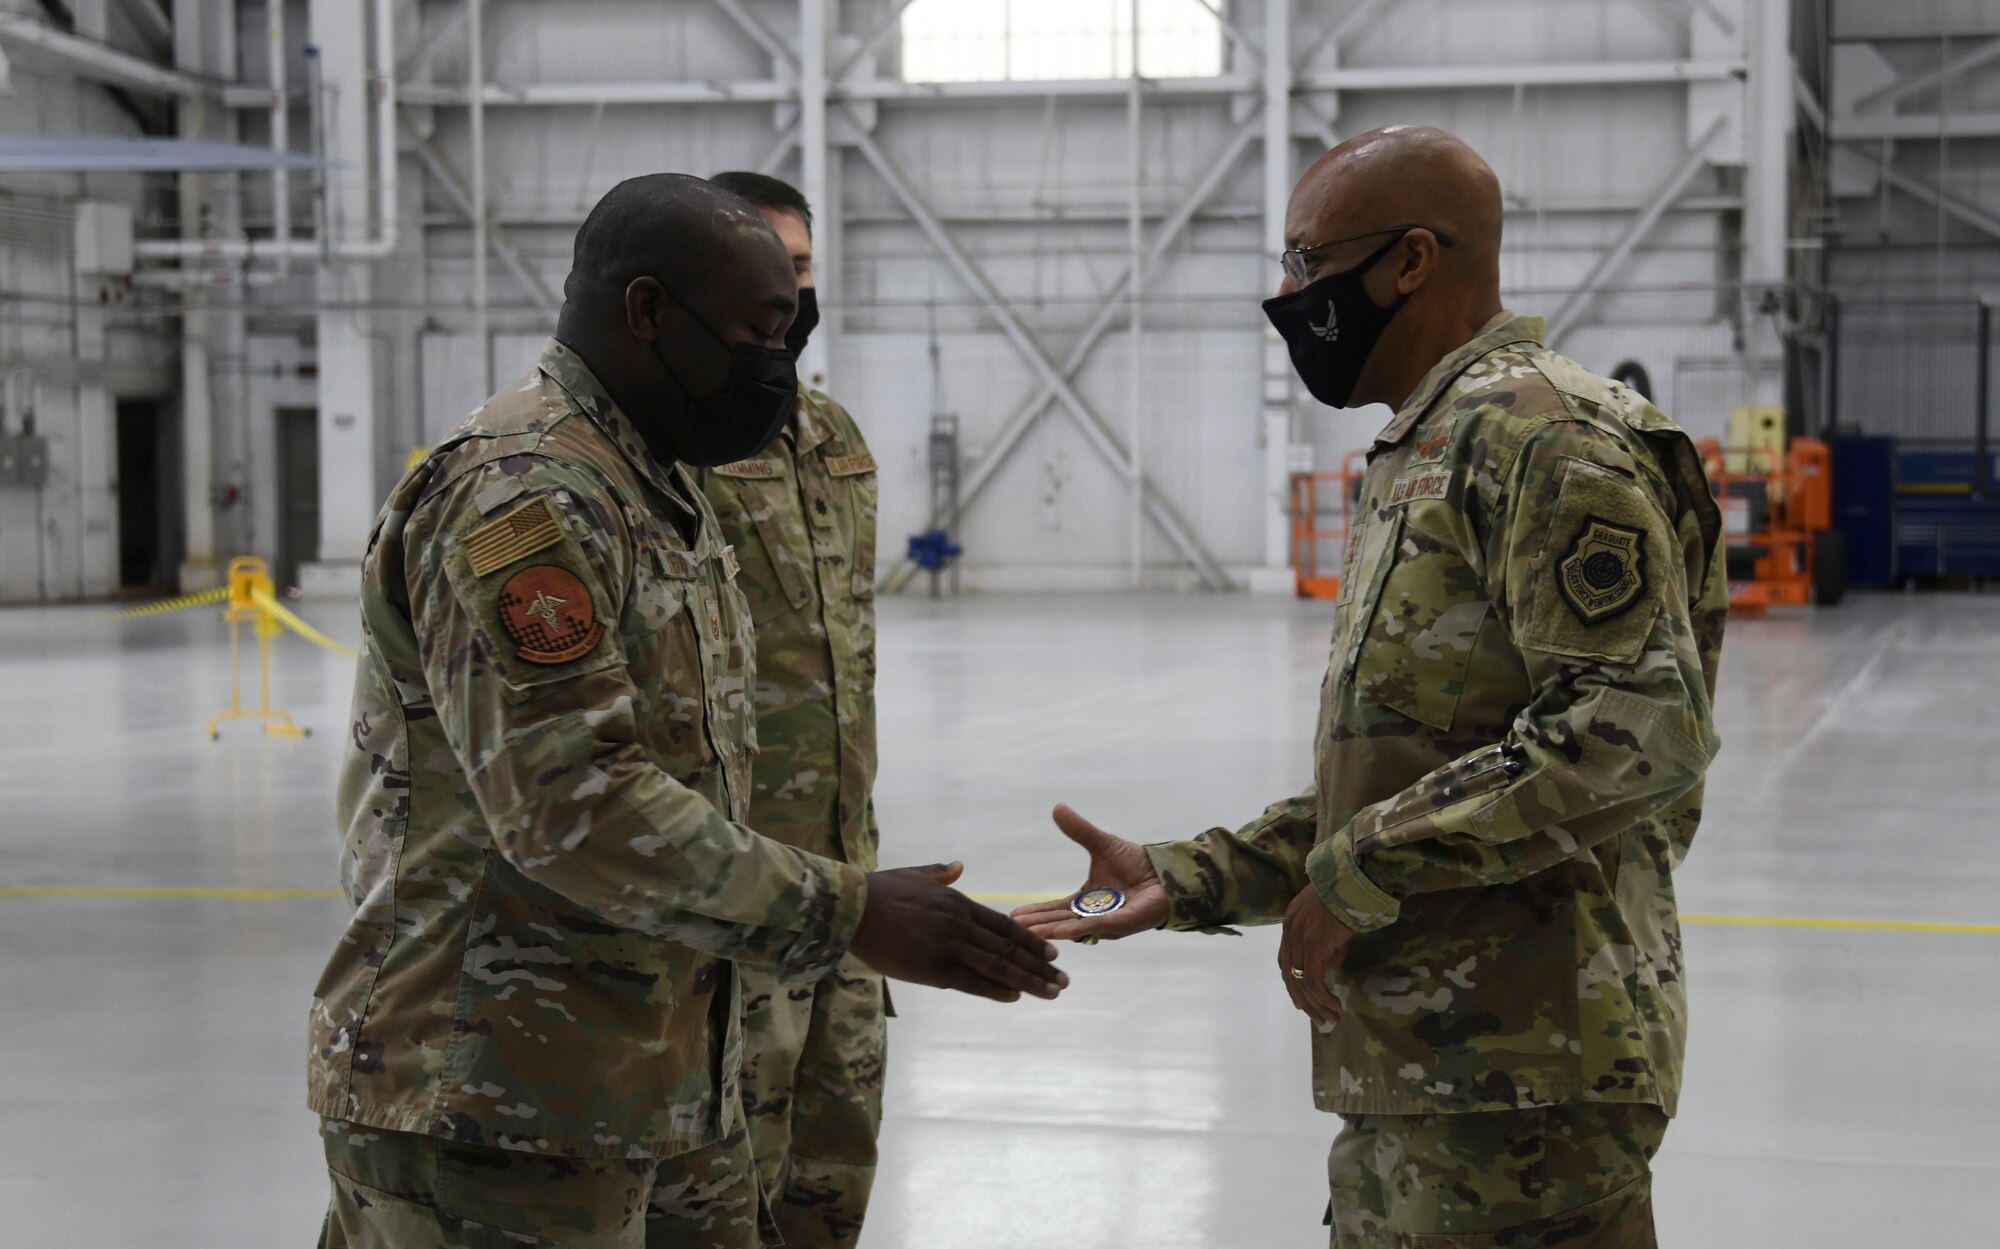 Air Force Chief of Staff Gen. CQ Brown, Jr. (right), presents a challenge coin to Master Sgt. Alfred McDuffie, 459th Air Refueling Squadron NCO in-charge of mobility operations, at Joint Base Andrews, Md., Nov. 17, 2021. During his visit, Brown coined multiple Airmen for their superior performances in their work centers and their contributions to the Air Force mission. (U.S. Air Force photo by Senior Airman Spencer Slocum)